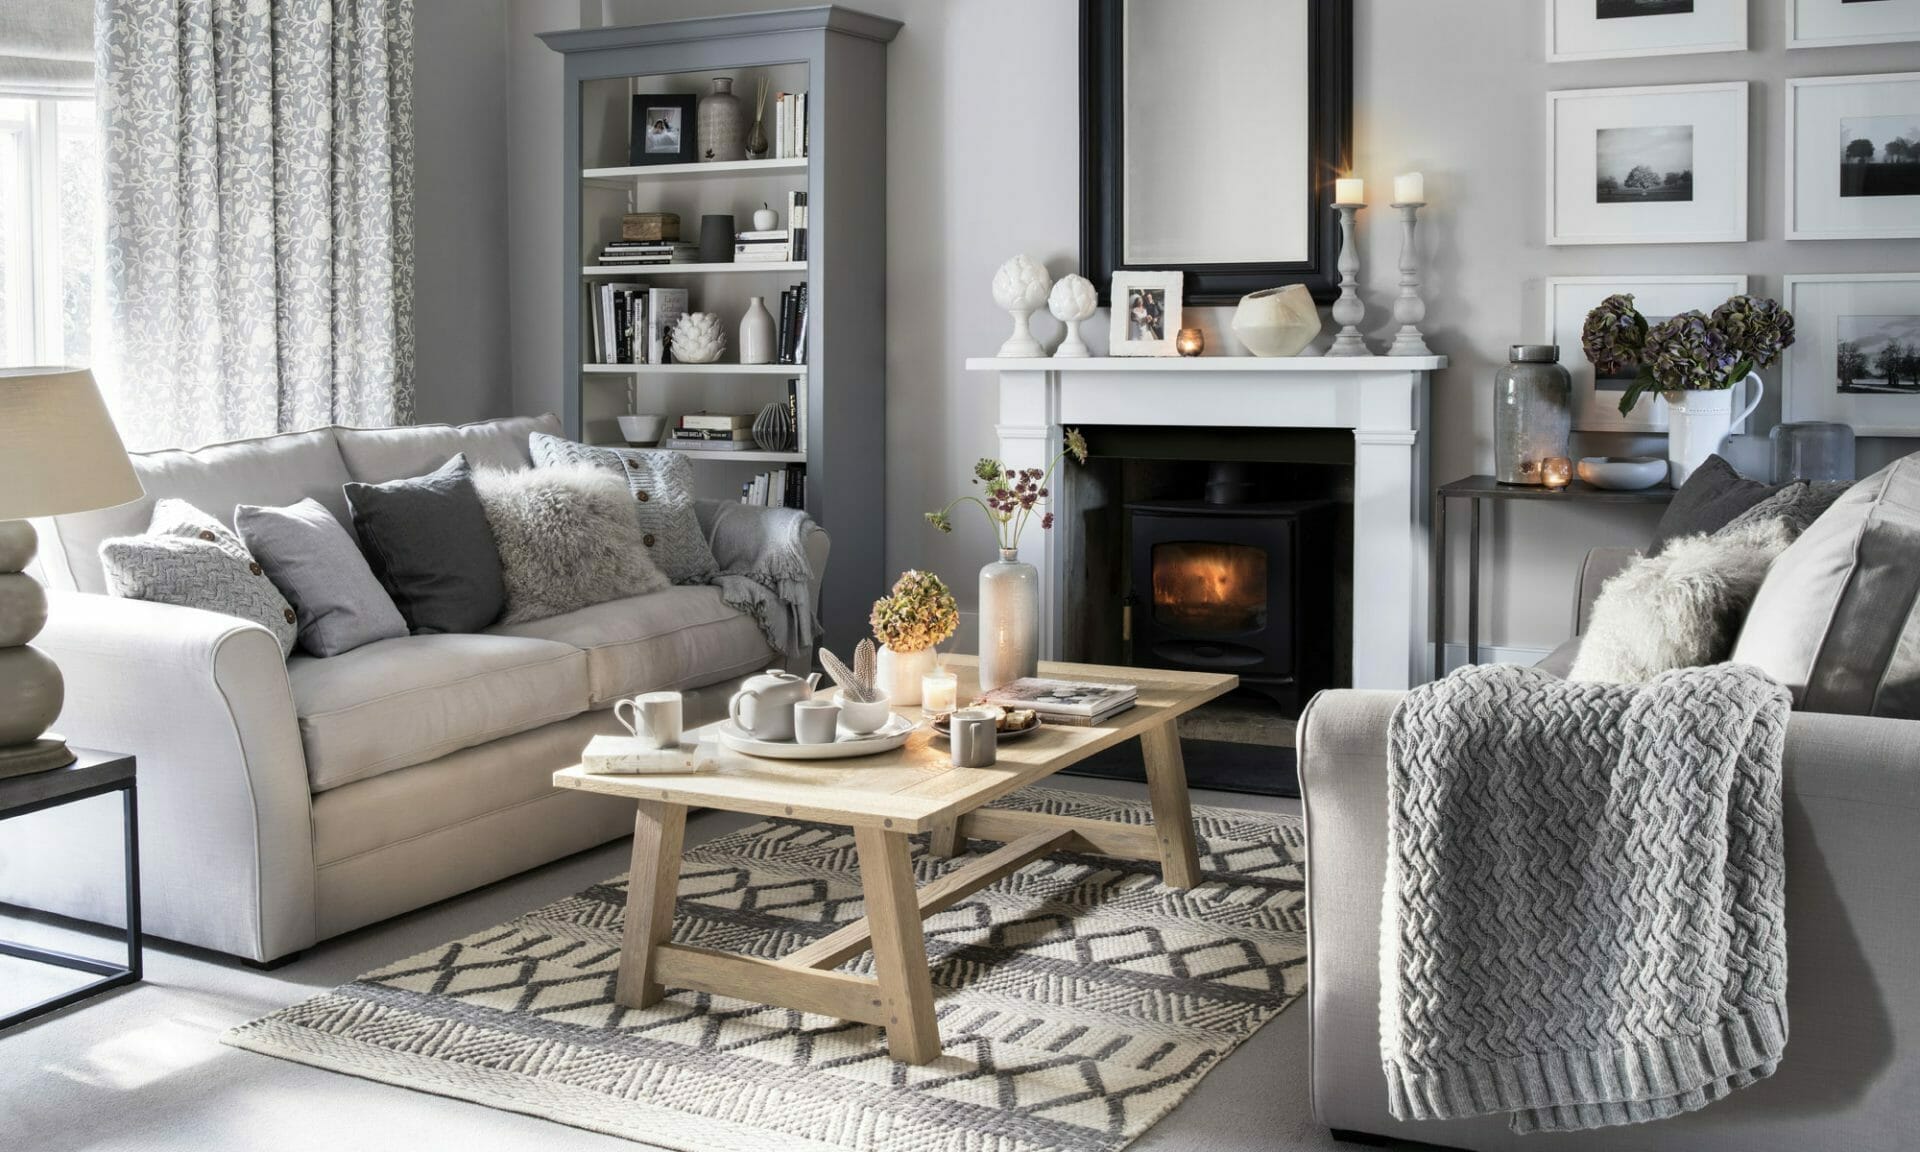 15 Best Cozy Home Decor Ideas For Anyone